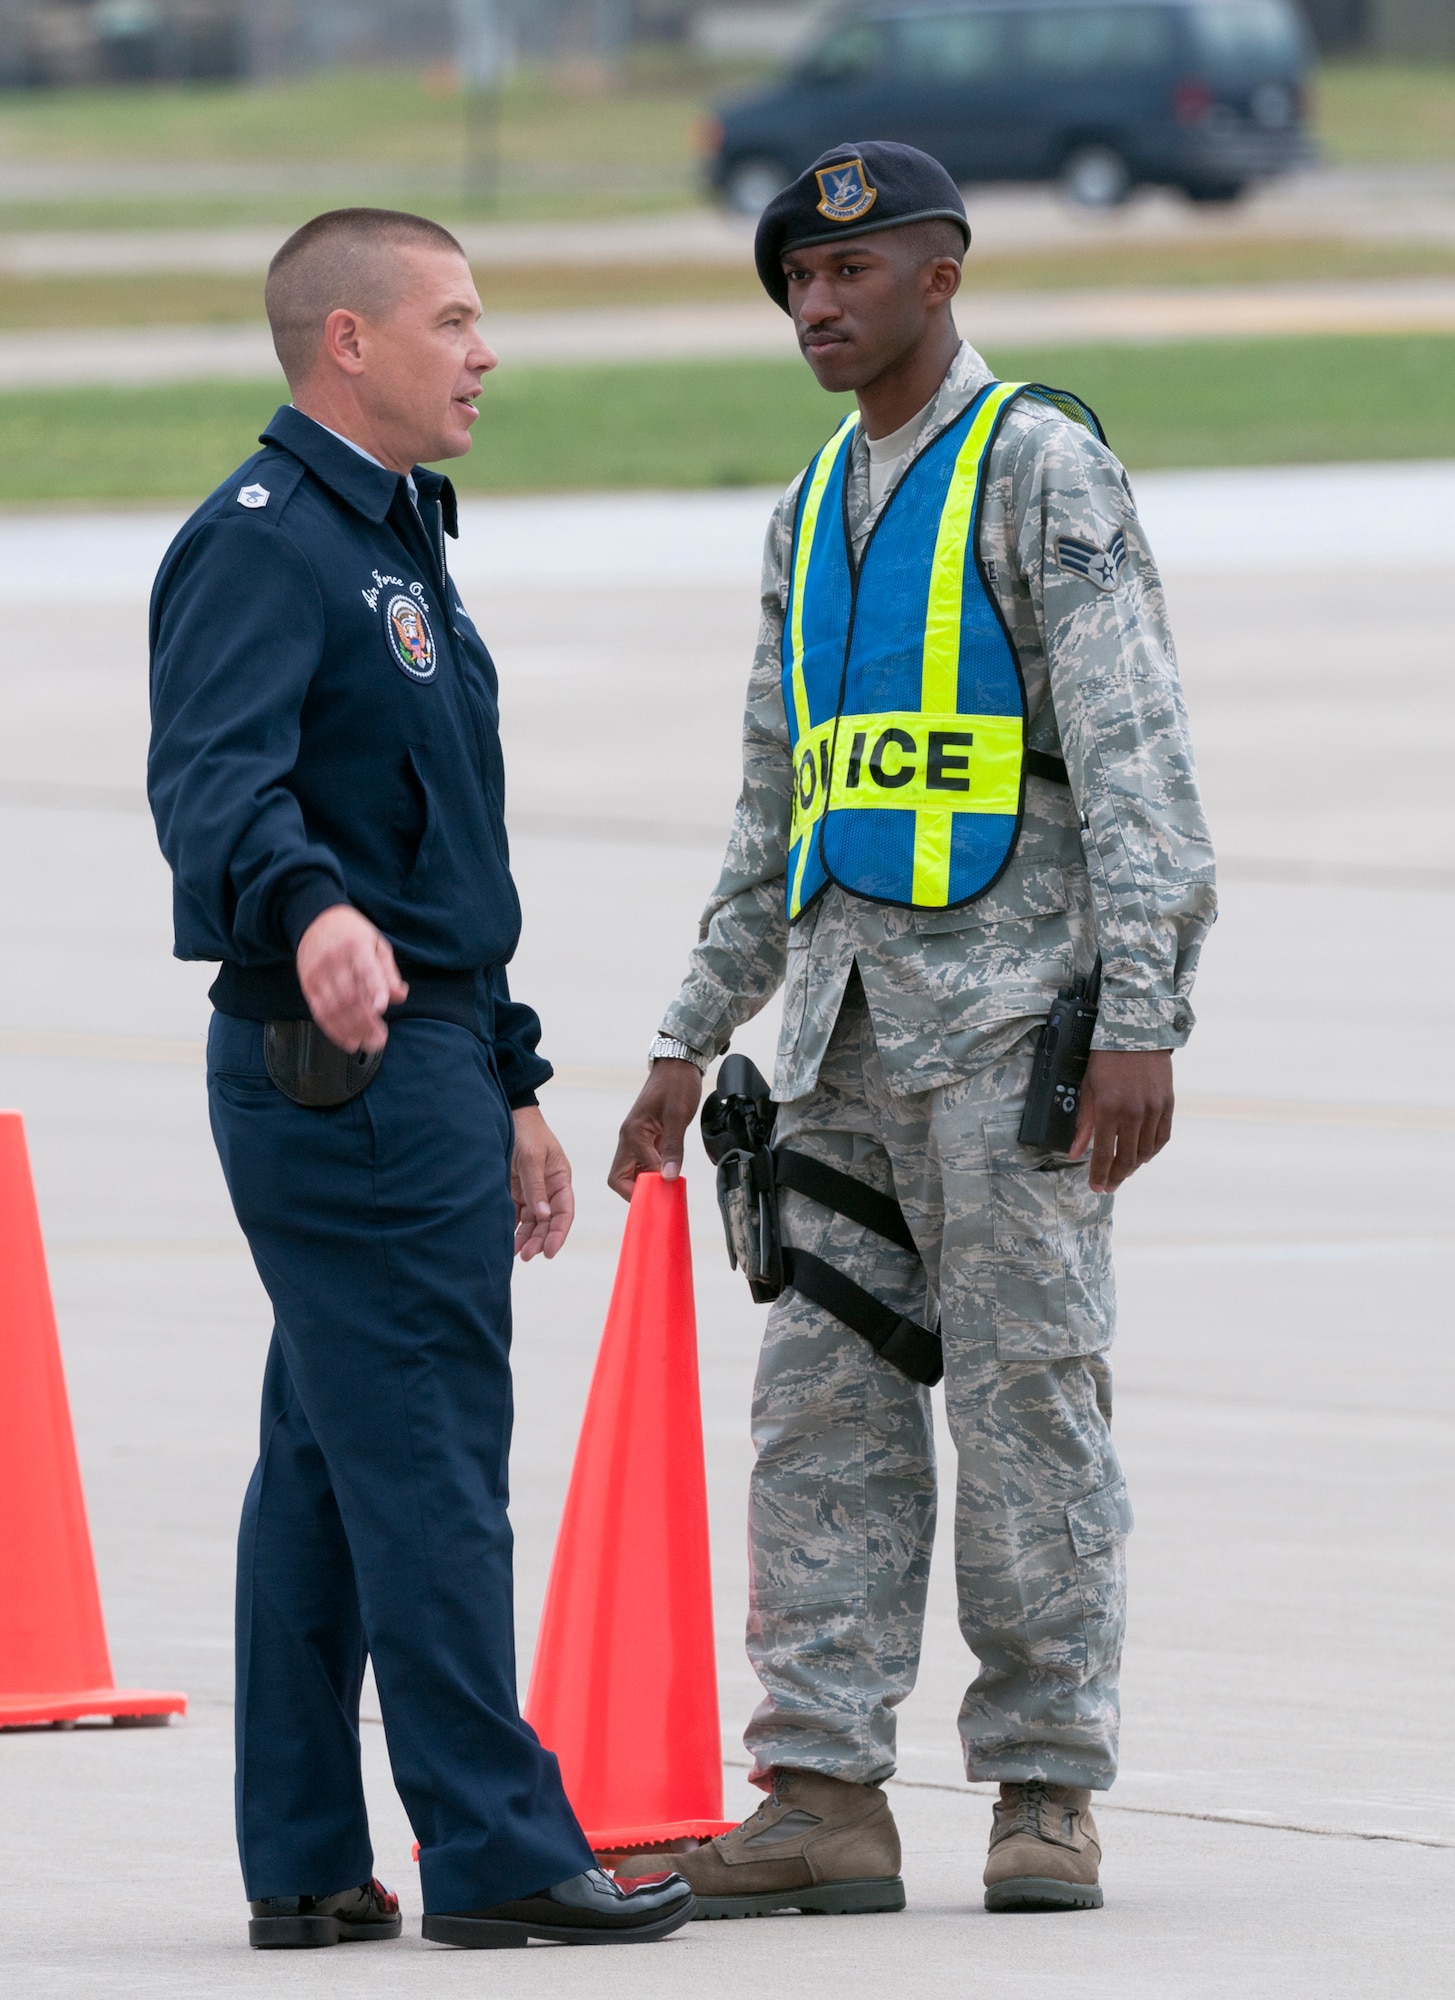 Senior Airman Durrell Motley (right) of the 133rd Security Forces Squadron places cones at the direction of a member of the Presidential Airlift Group, marking a perimeter surrounding Air Force One on Aug. 30, 2011. Air Force One, the VC-25A which is a highly customized Boeing 747-200B, arrived at the Minnesota Air National Guard base bringing the commander-in-chief to the Twin Cities where he delivered a speech to the American Legion Annual Conference. The visit is heavily supported with security, logistics, media and other support by the Airmen of the 133rd Airlift Wing. USAF official photo by Senior Master Sgt. Mark Moss